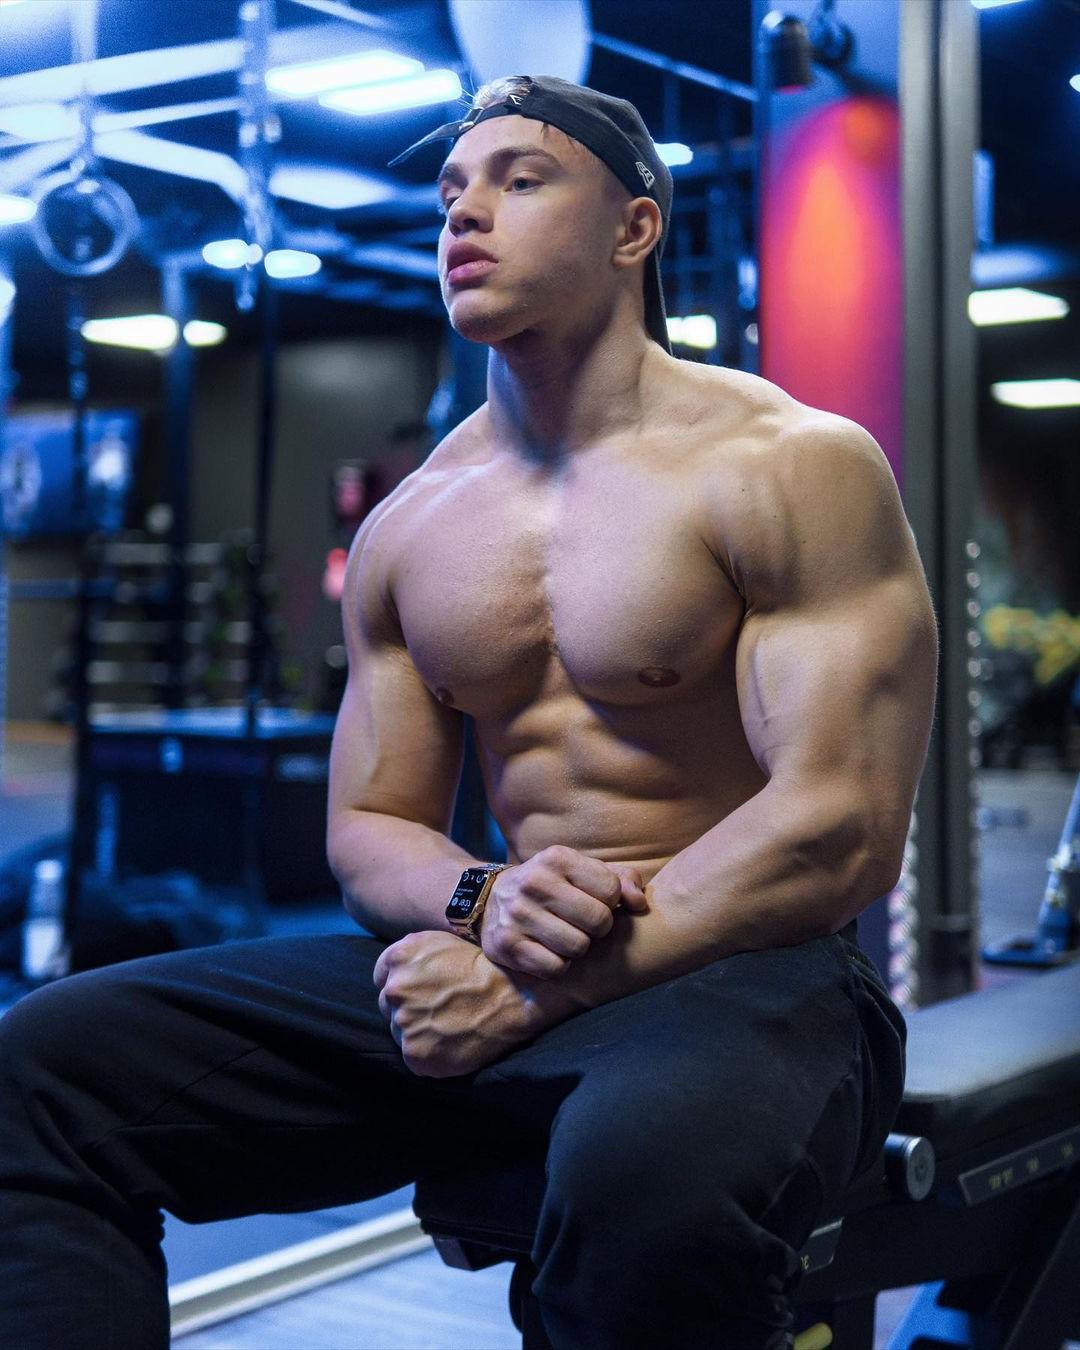 huge-swole-muscle-teen-college-bro-gym-workout-oliver-forslin-big-pecs-strong-arms-biceps